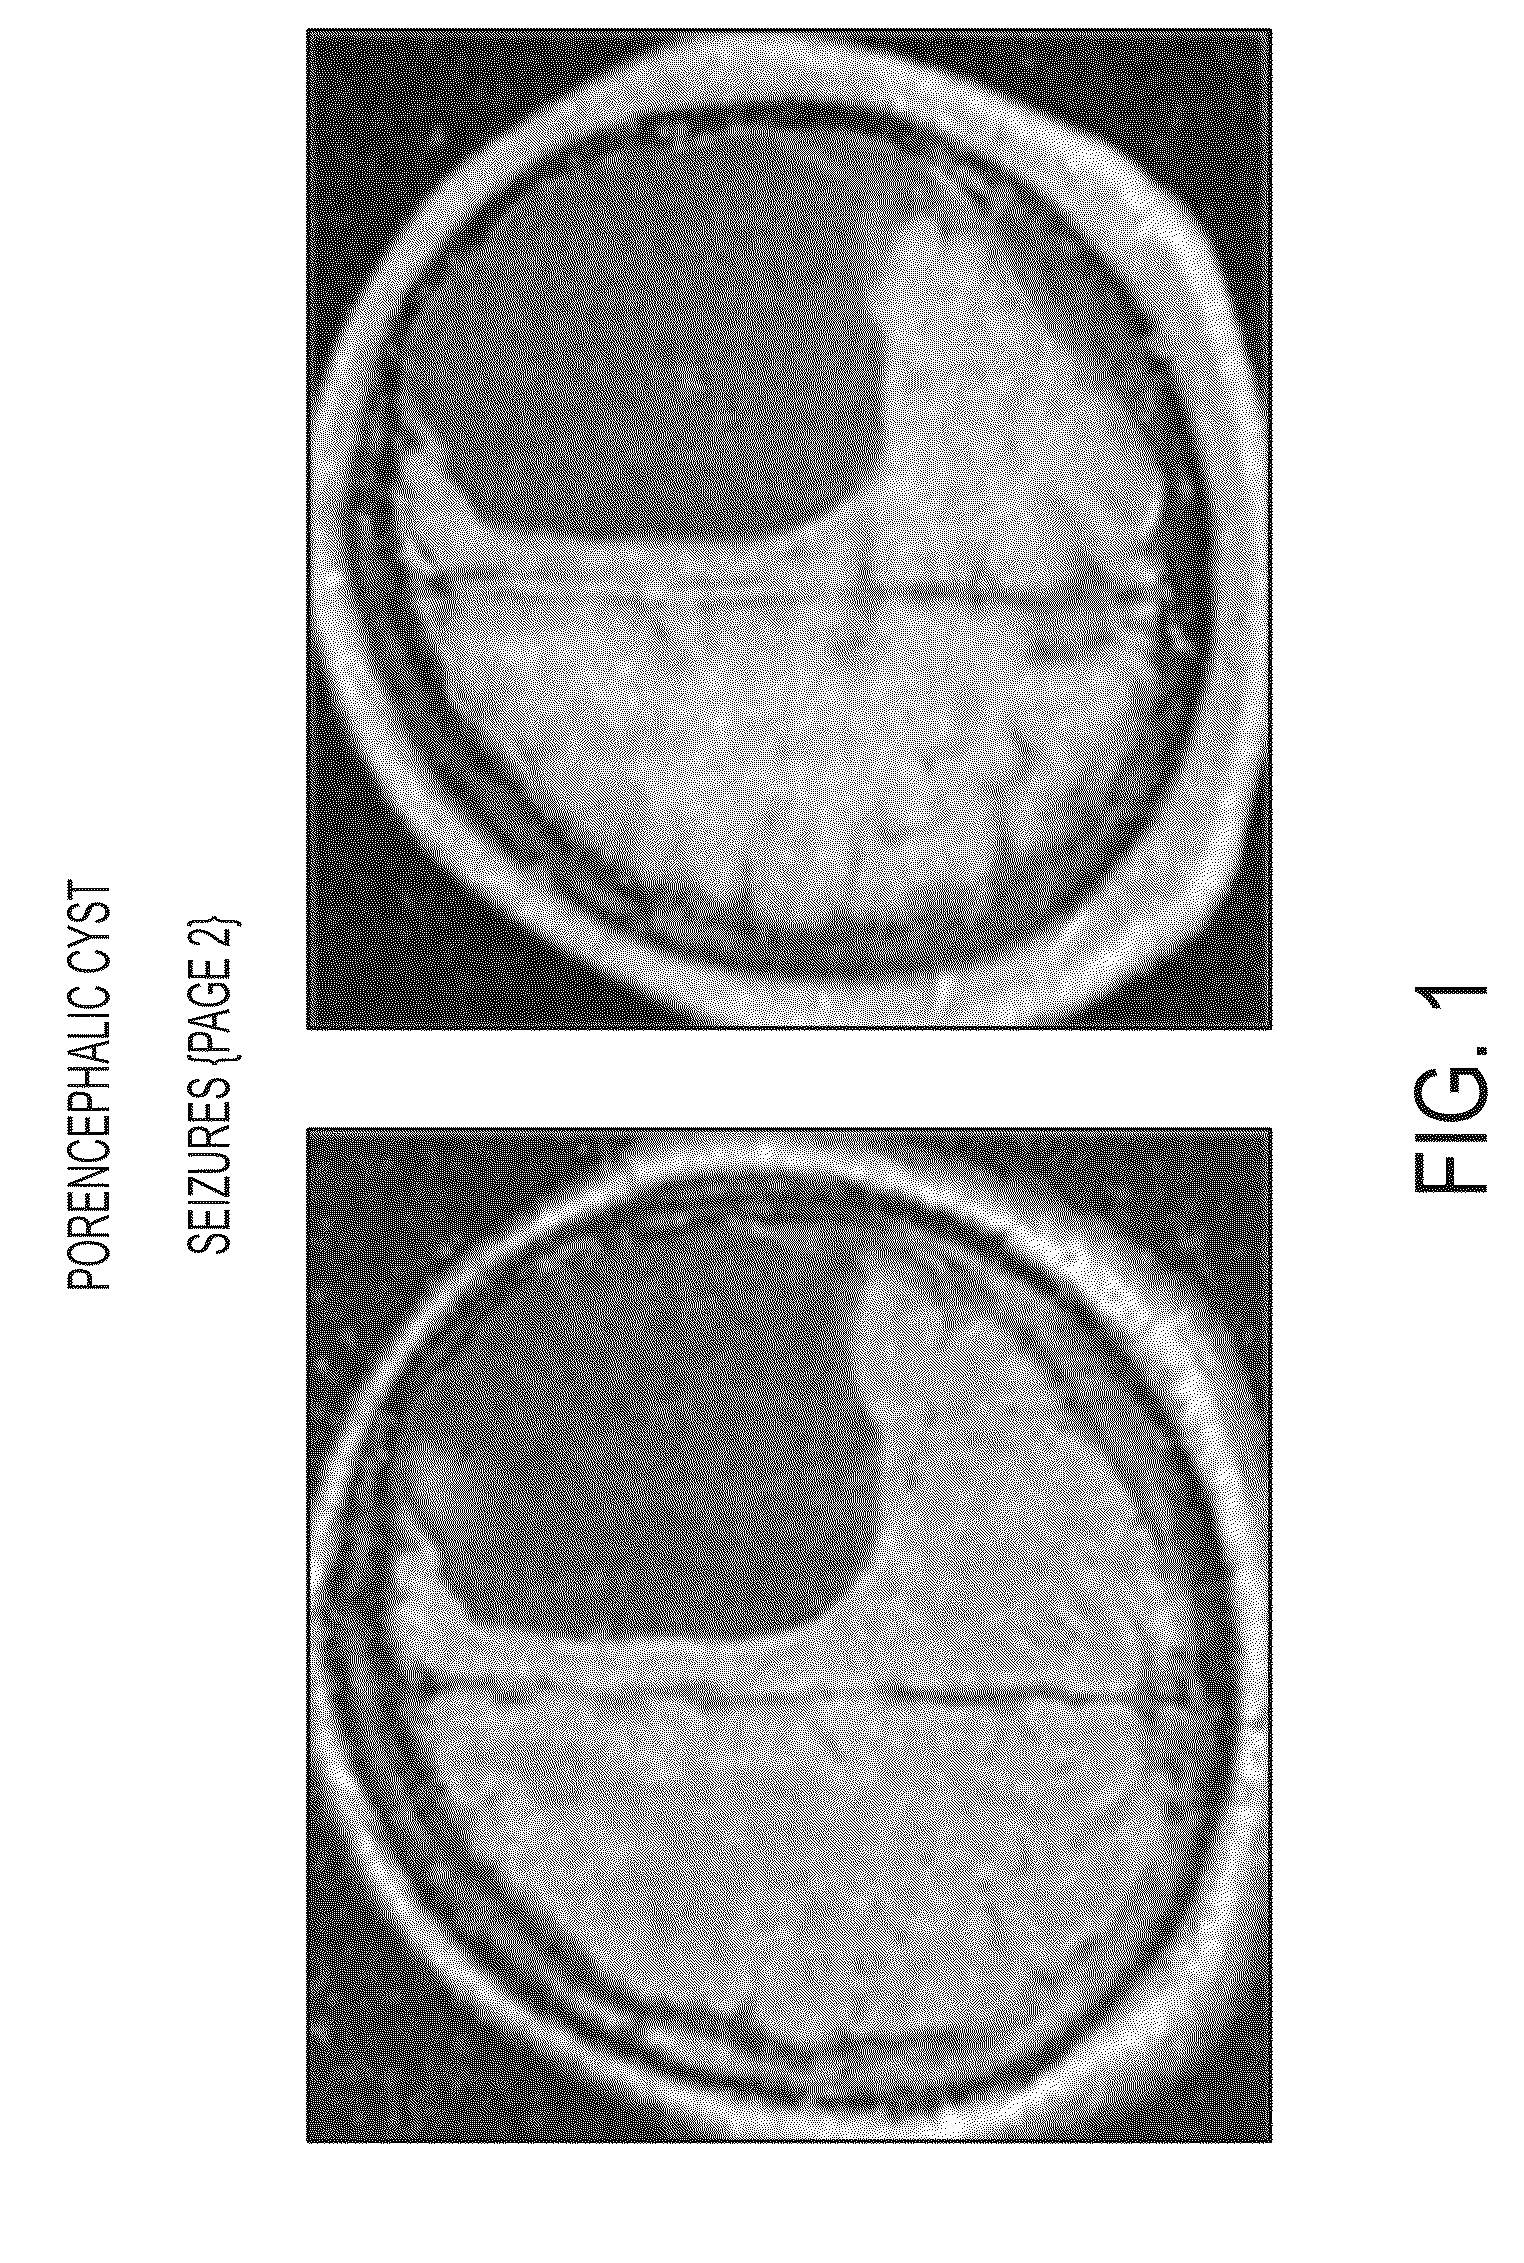 Method for intrathecal administration of autologous stem cells in premature infants